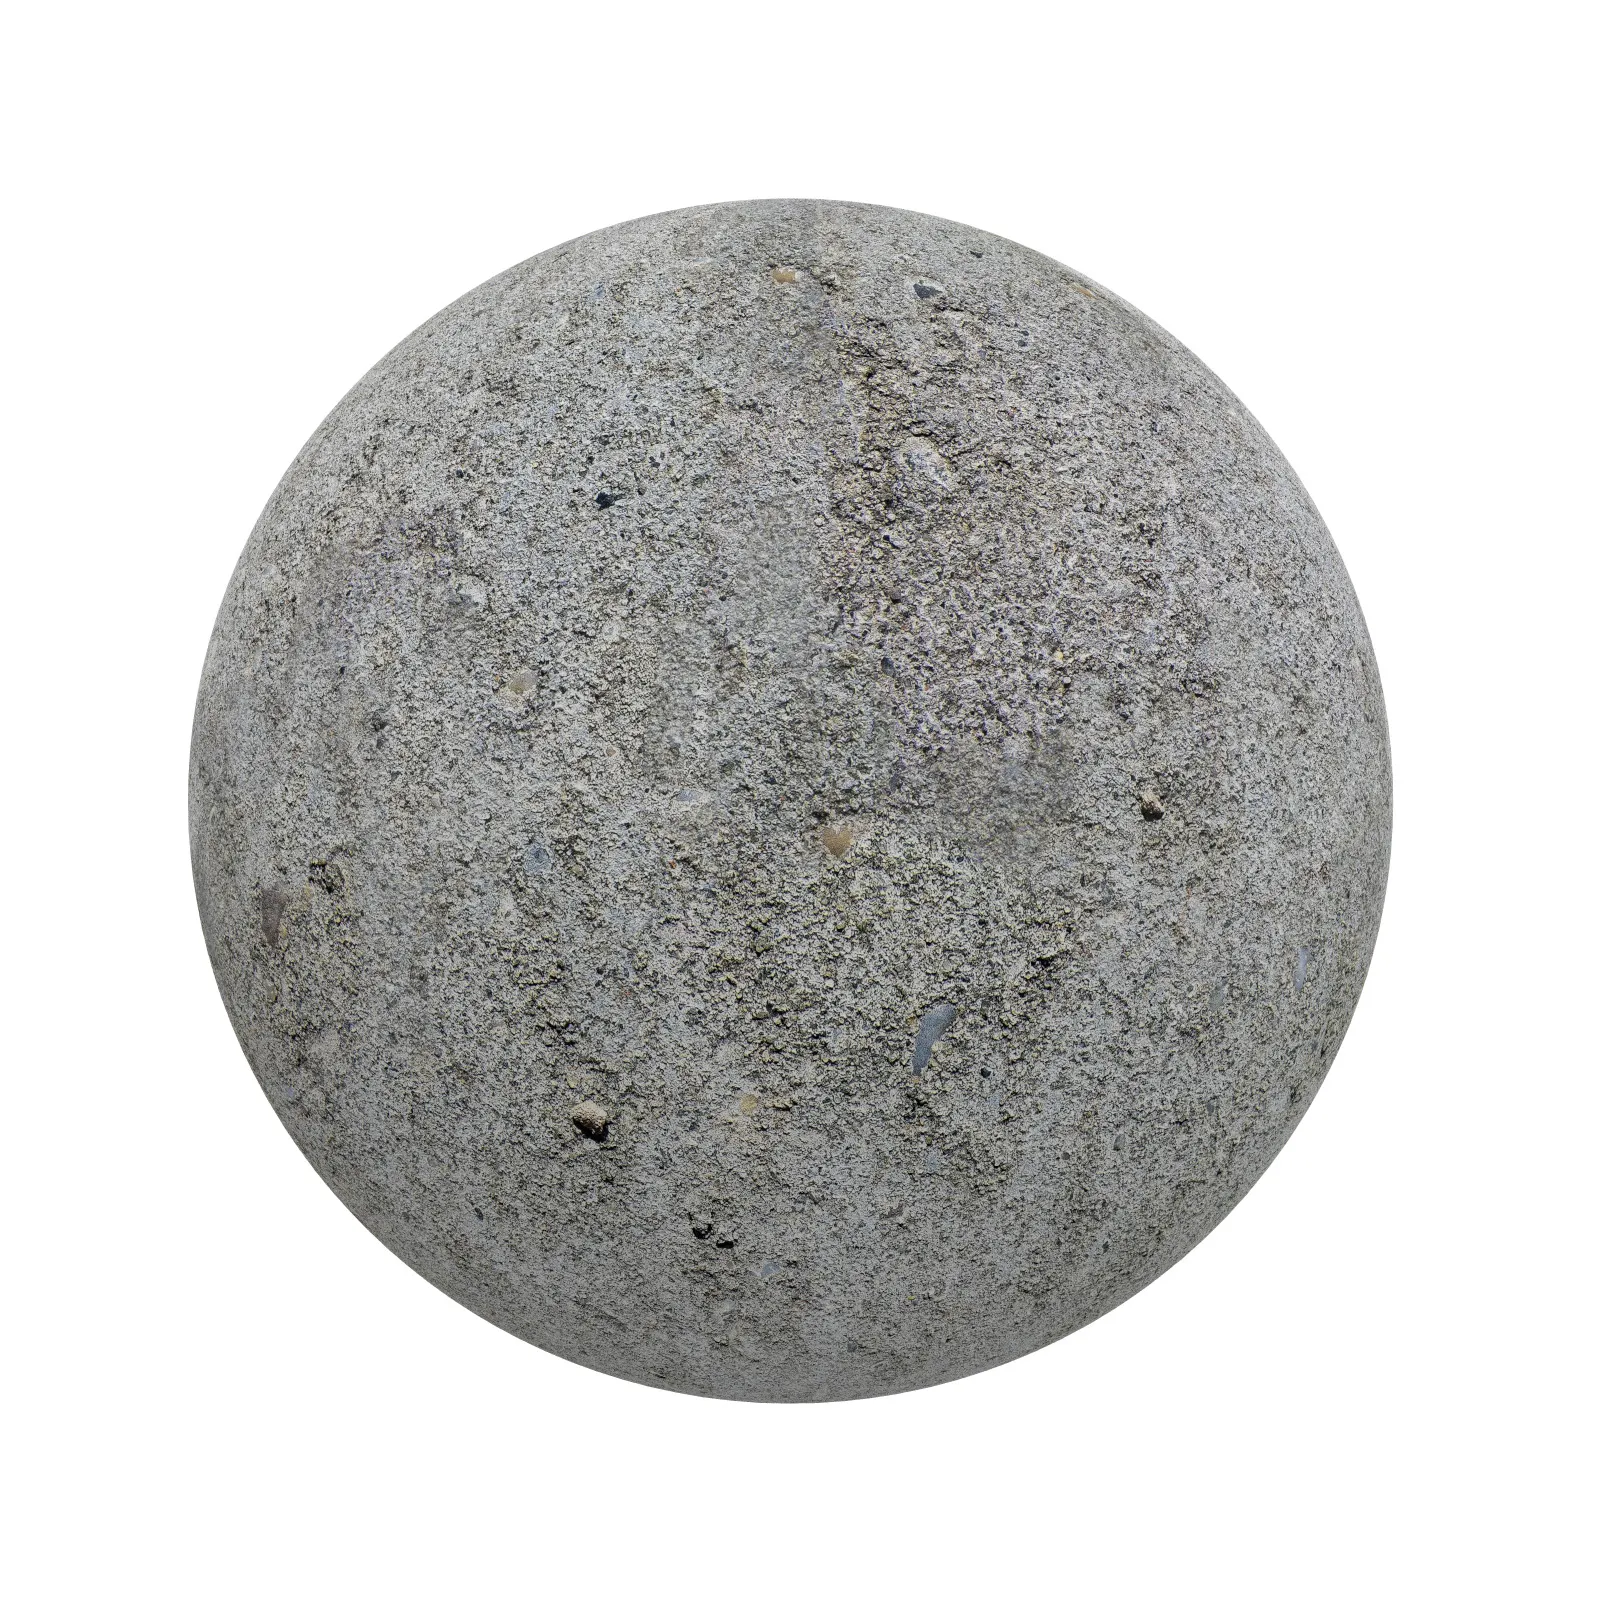 TEXTURES – STONES – CGAxis PBR Colection Vol 1 Stones – rough grey stone 2